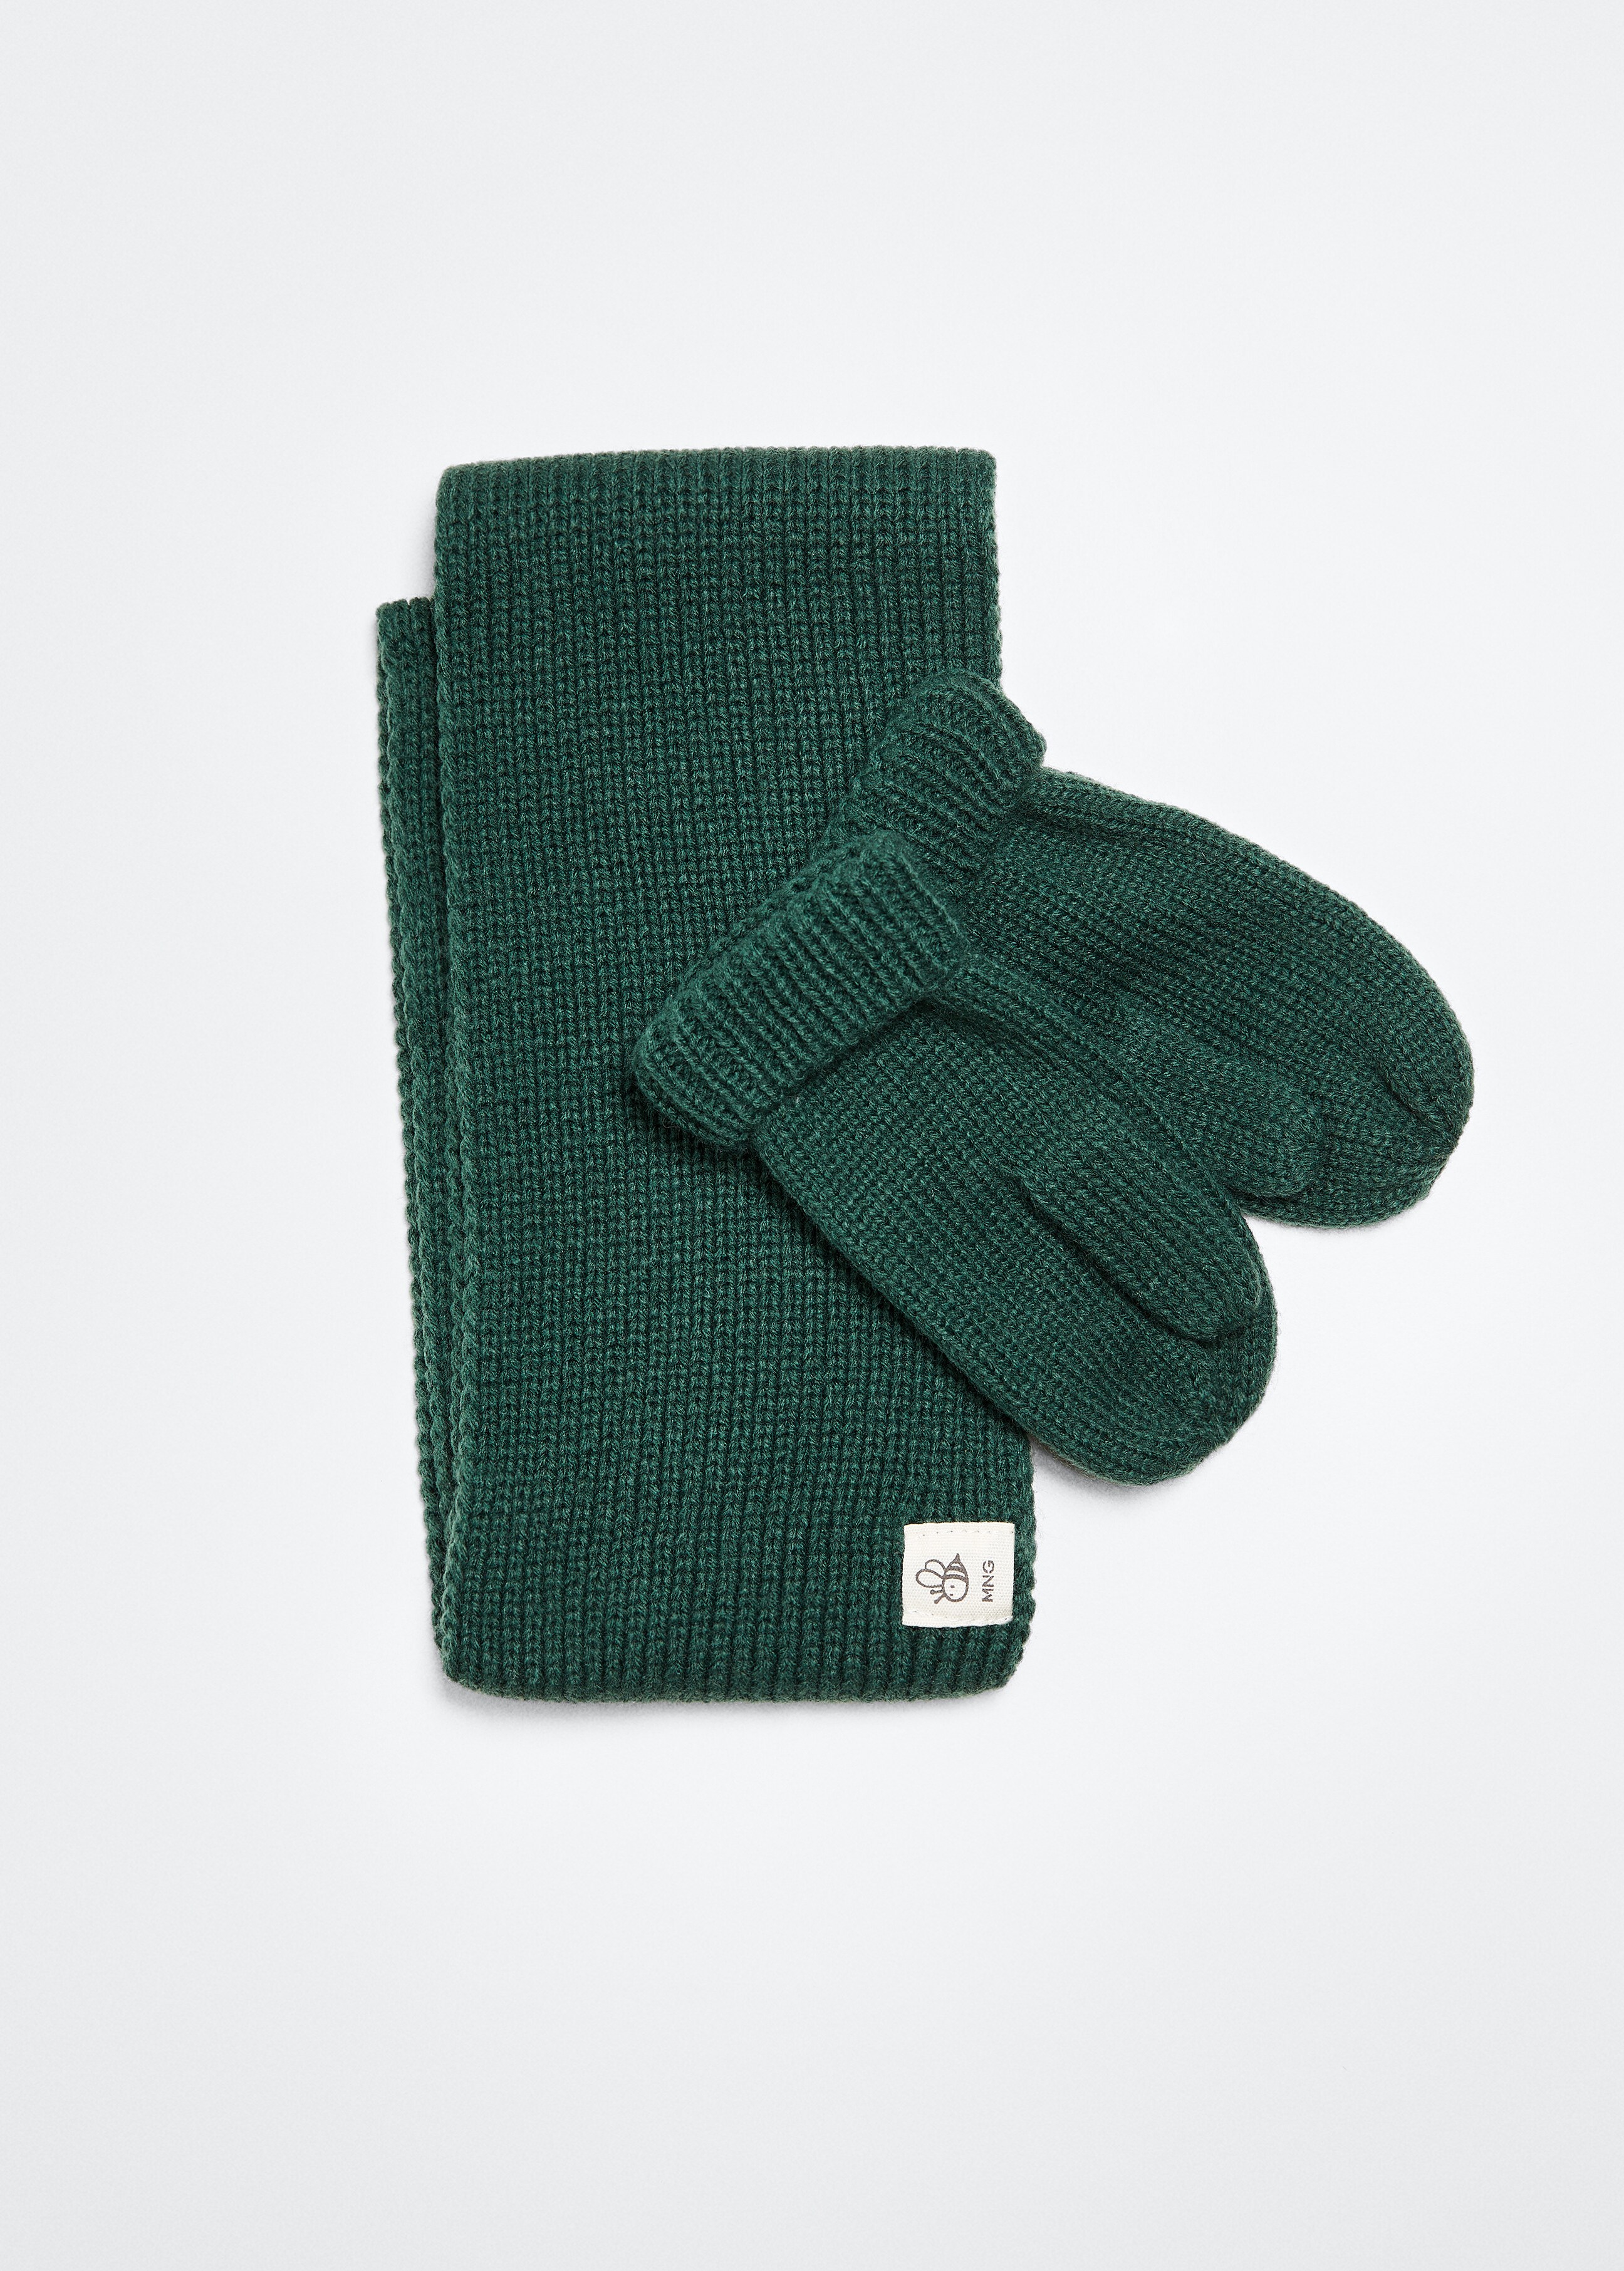 Knit gloves - Details of the article 3